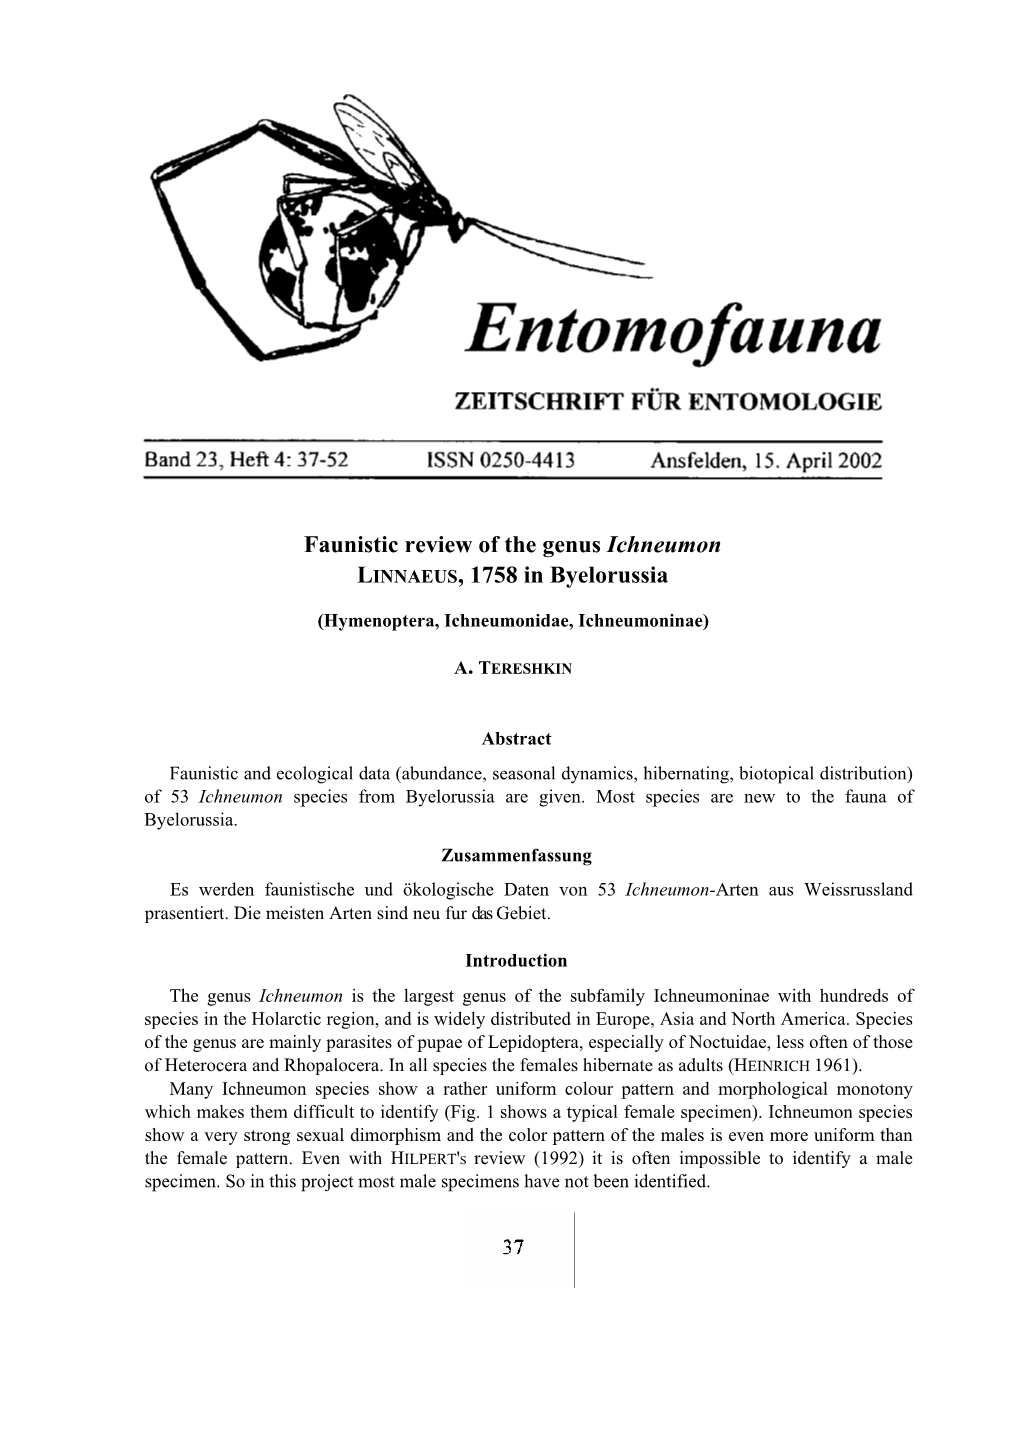 Faunistic Review of the Genus Ichneumon LINNAEUS, 1758 in Byelorussia